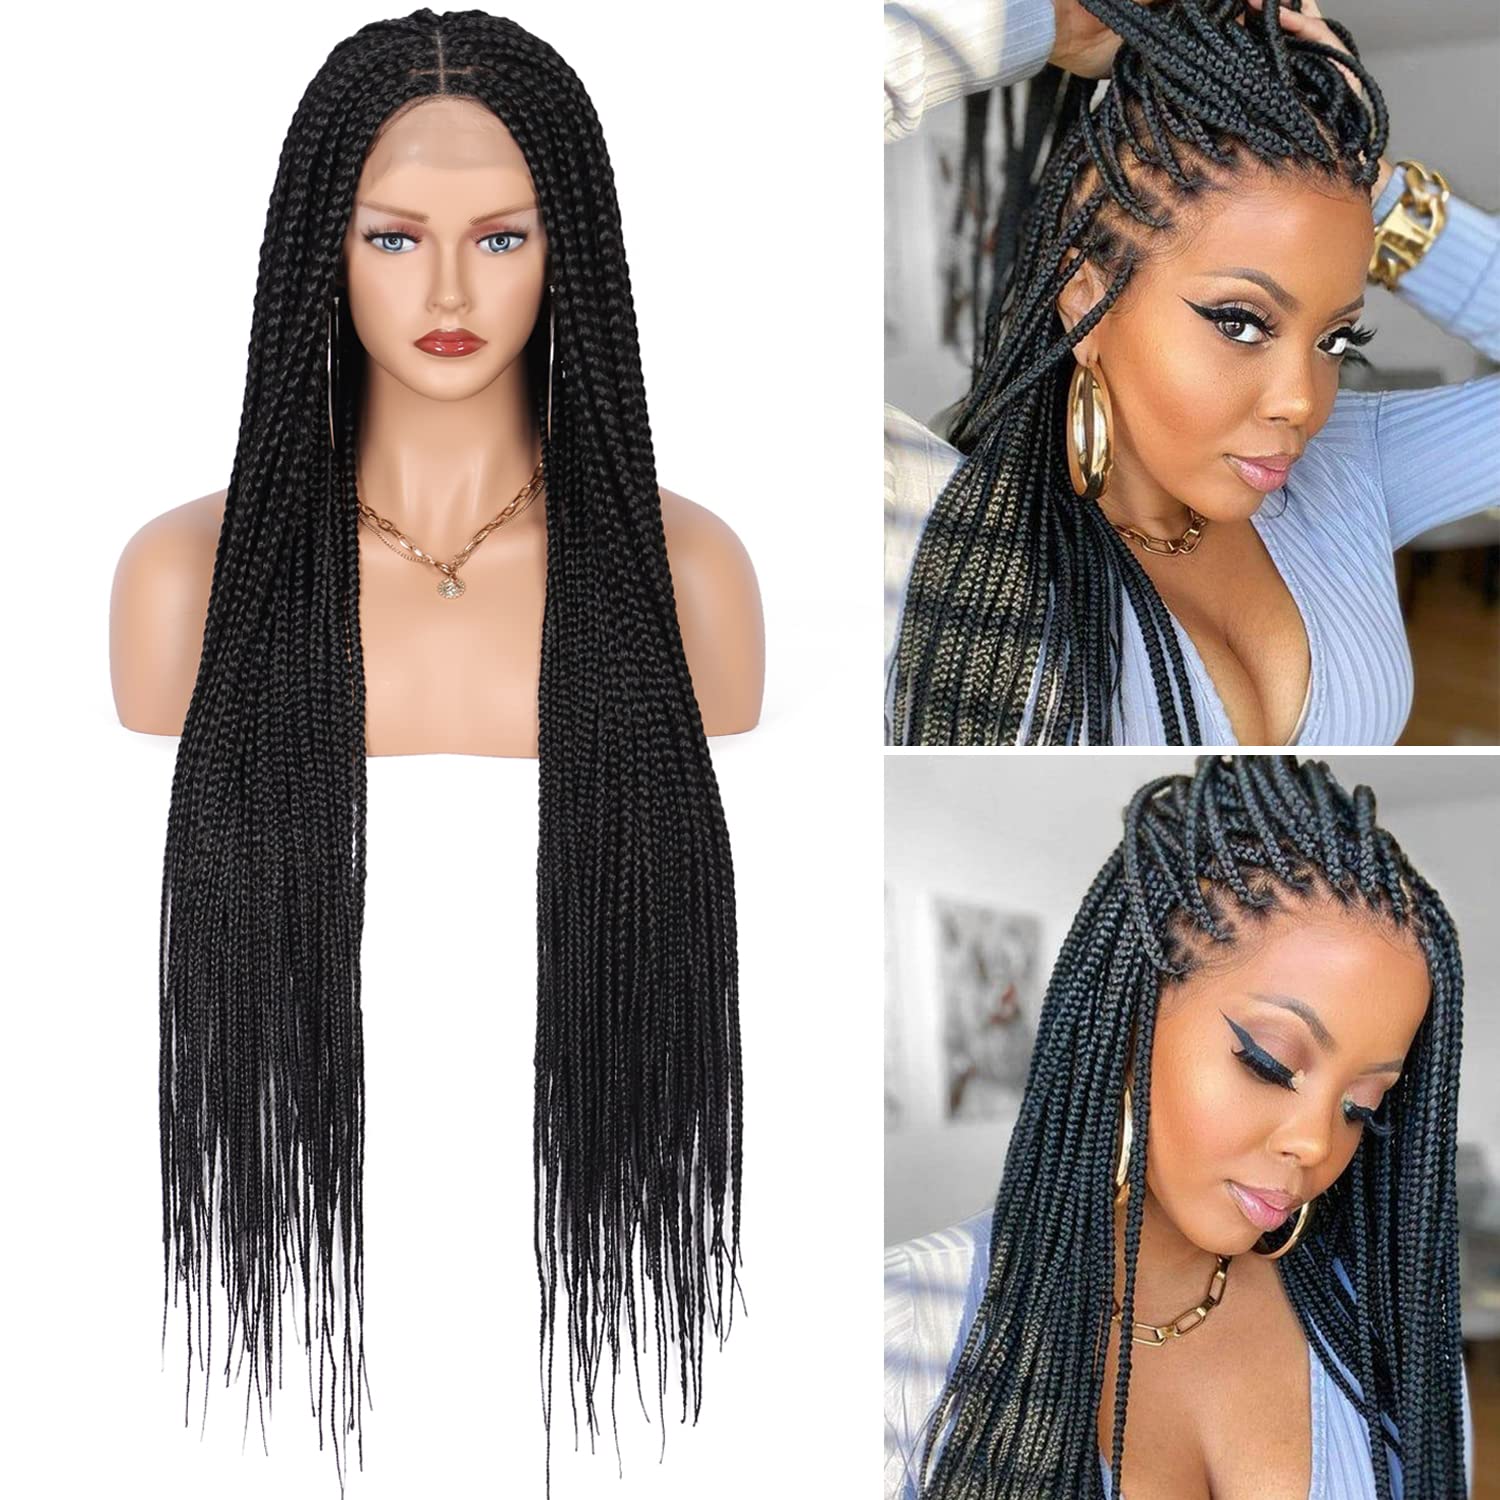 Fecihor 36 Full double Lace Front Box Braided Wigs Knotless